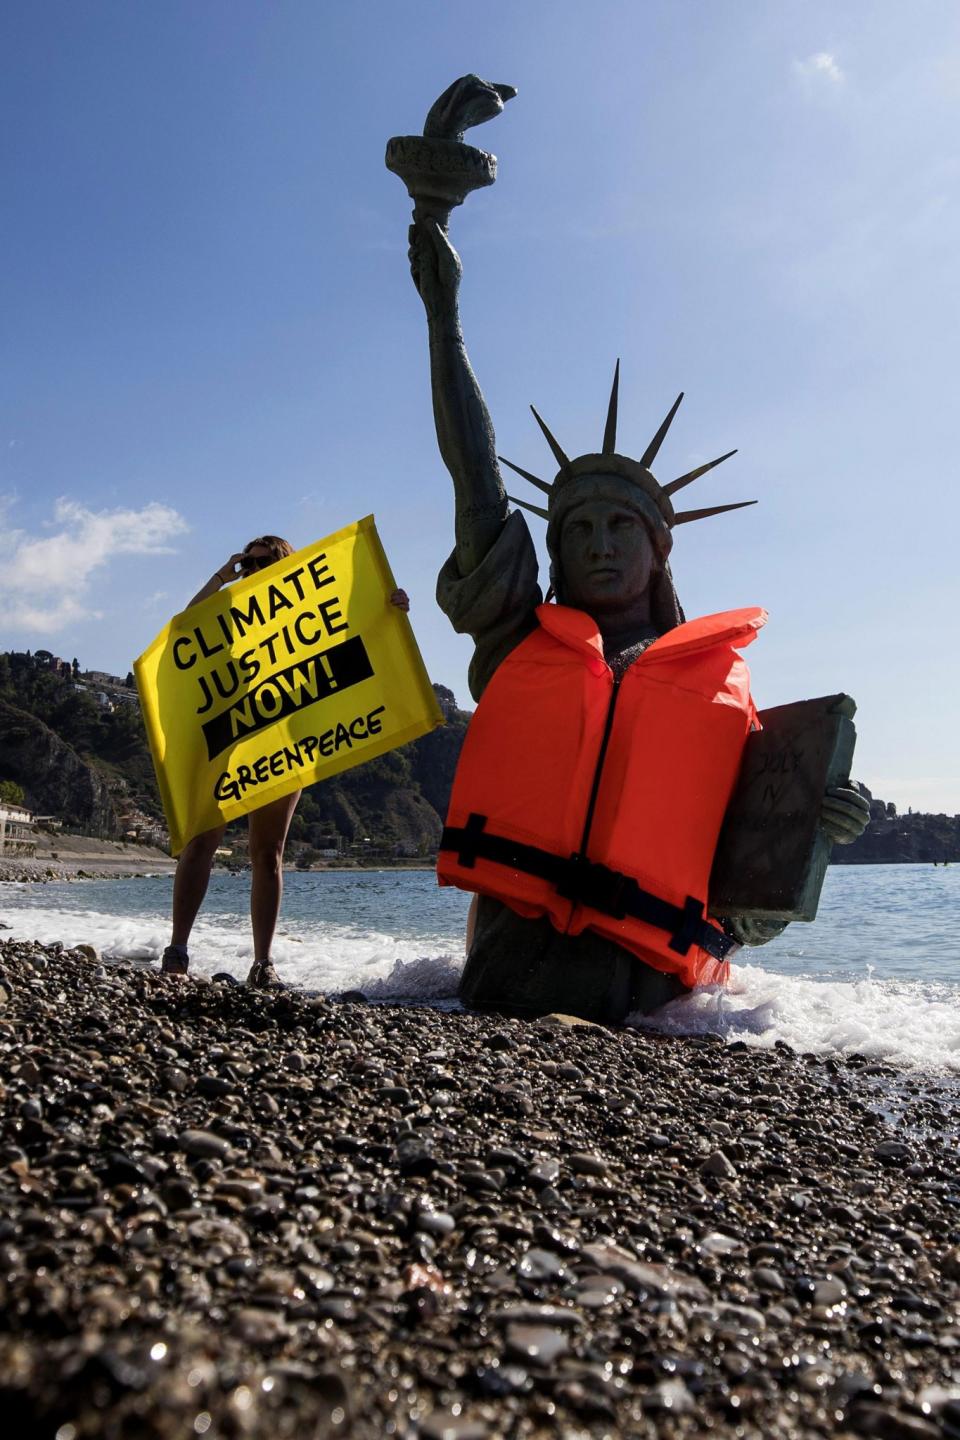 <p>Greenpeace activists stage a demonstration in Giardini Naxos, near the venue of the G7 summit in the Sicilian town of Taormina, southern Italy, Friday, May 26, 2017. Climate change promises to be the most problematic issue for this summit after Trump’s decision to review U.S. policies related to the Paris Agreement on fighting global warming. (Angelo Carconi/ANSA via AP) </p>